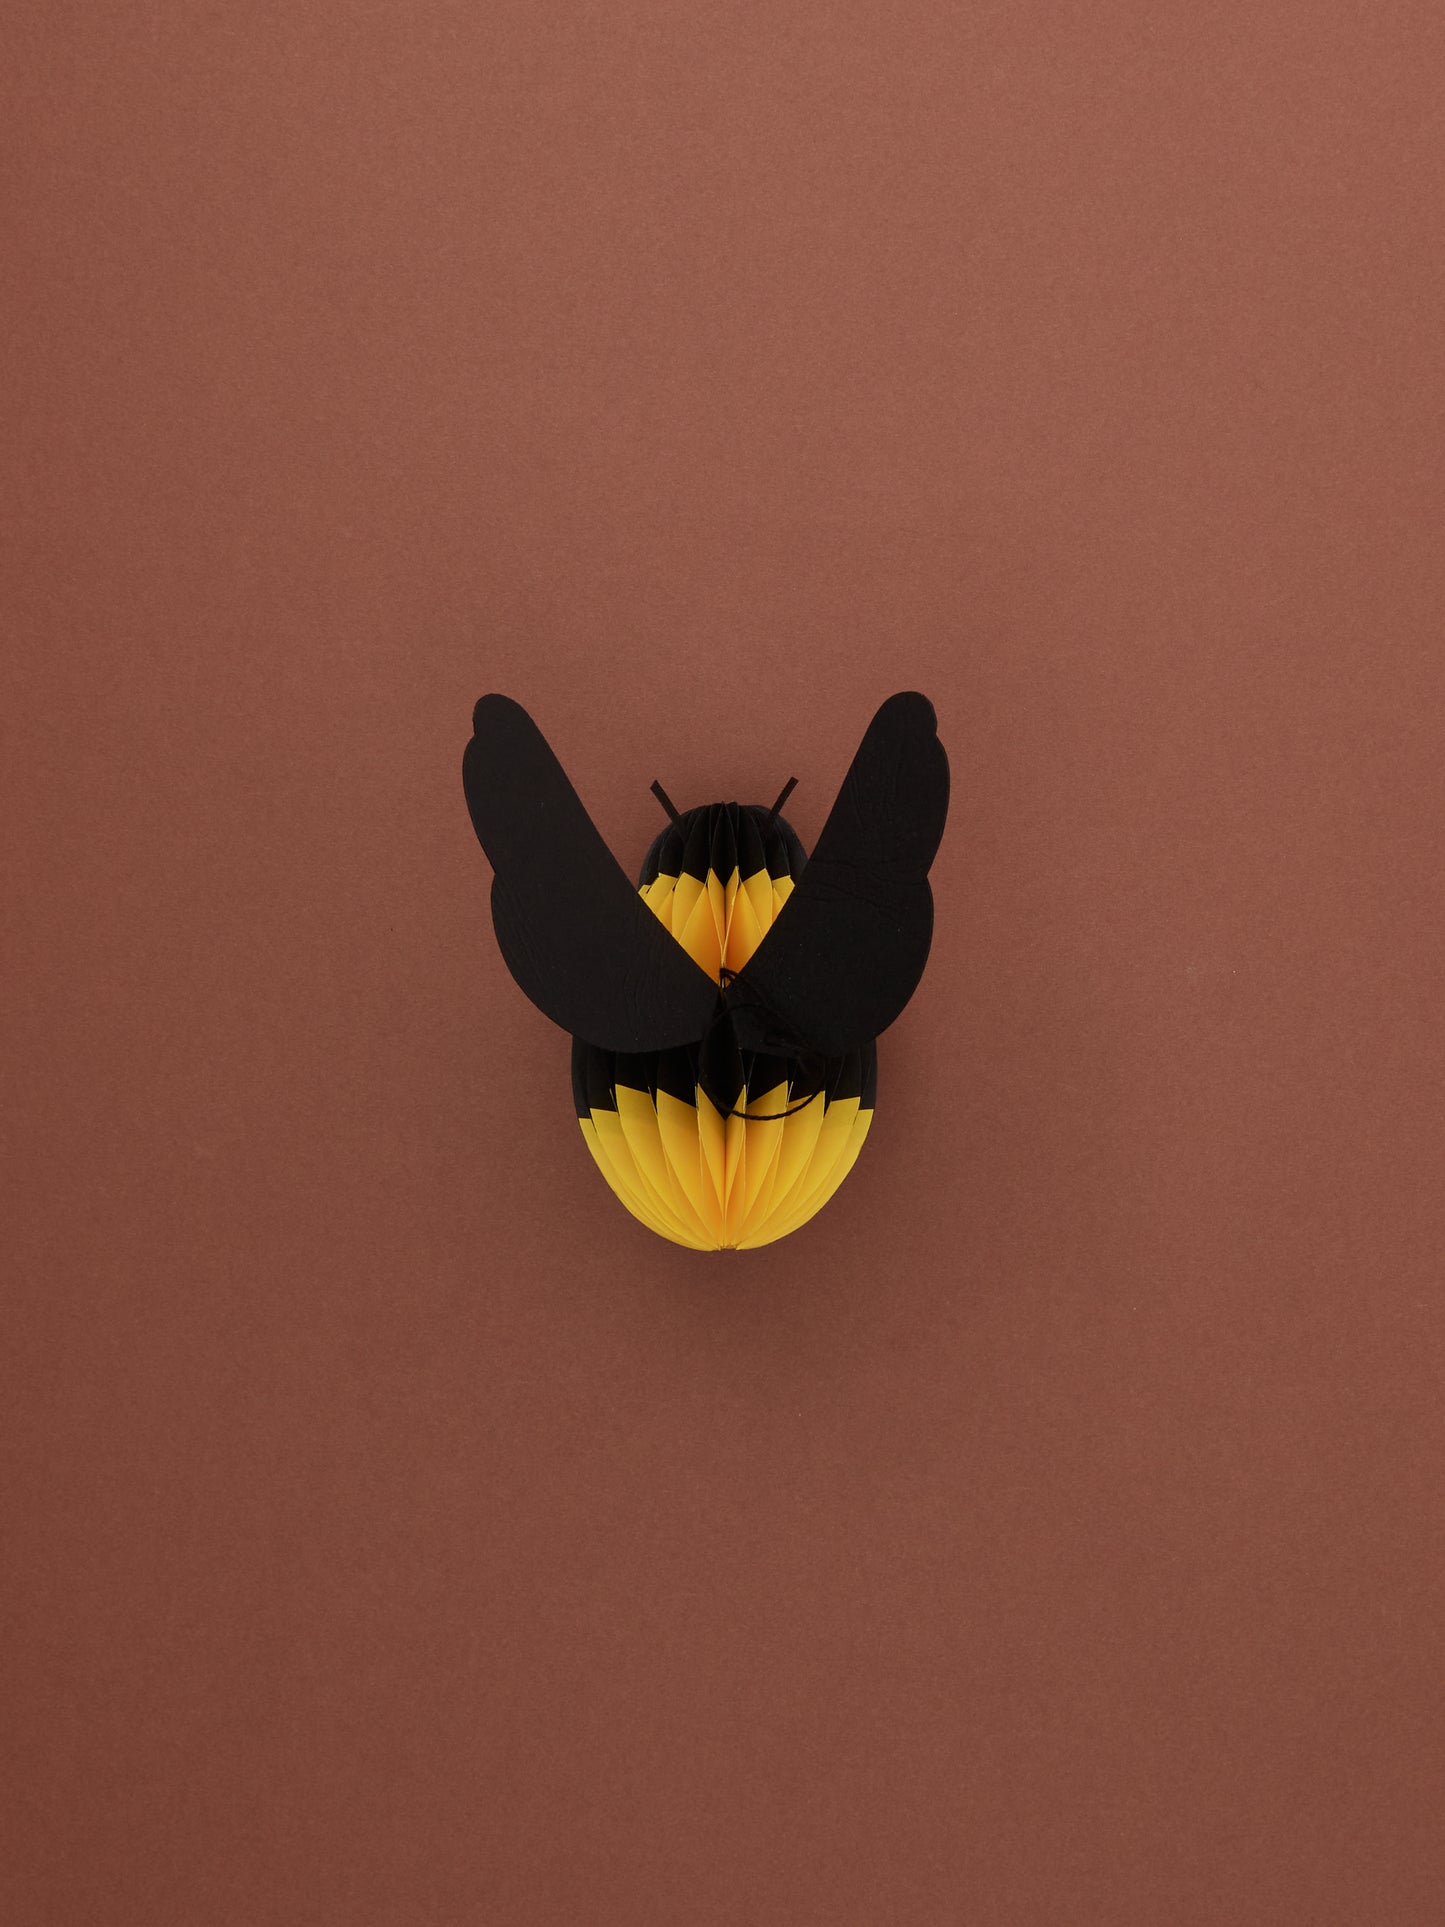 Bumblebee Paper Ornament by Grzegorz